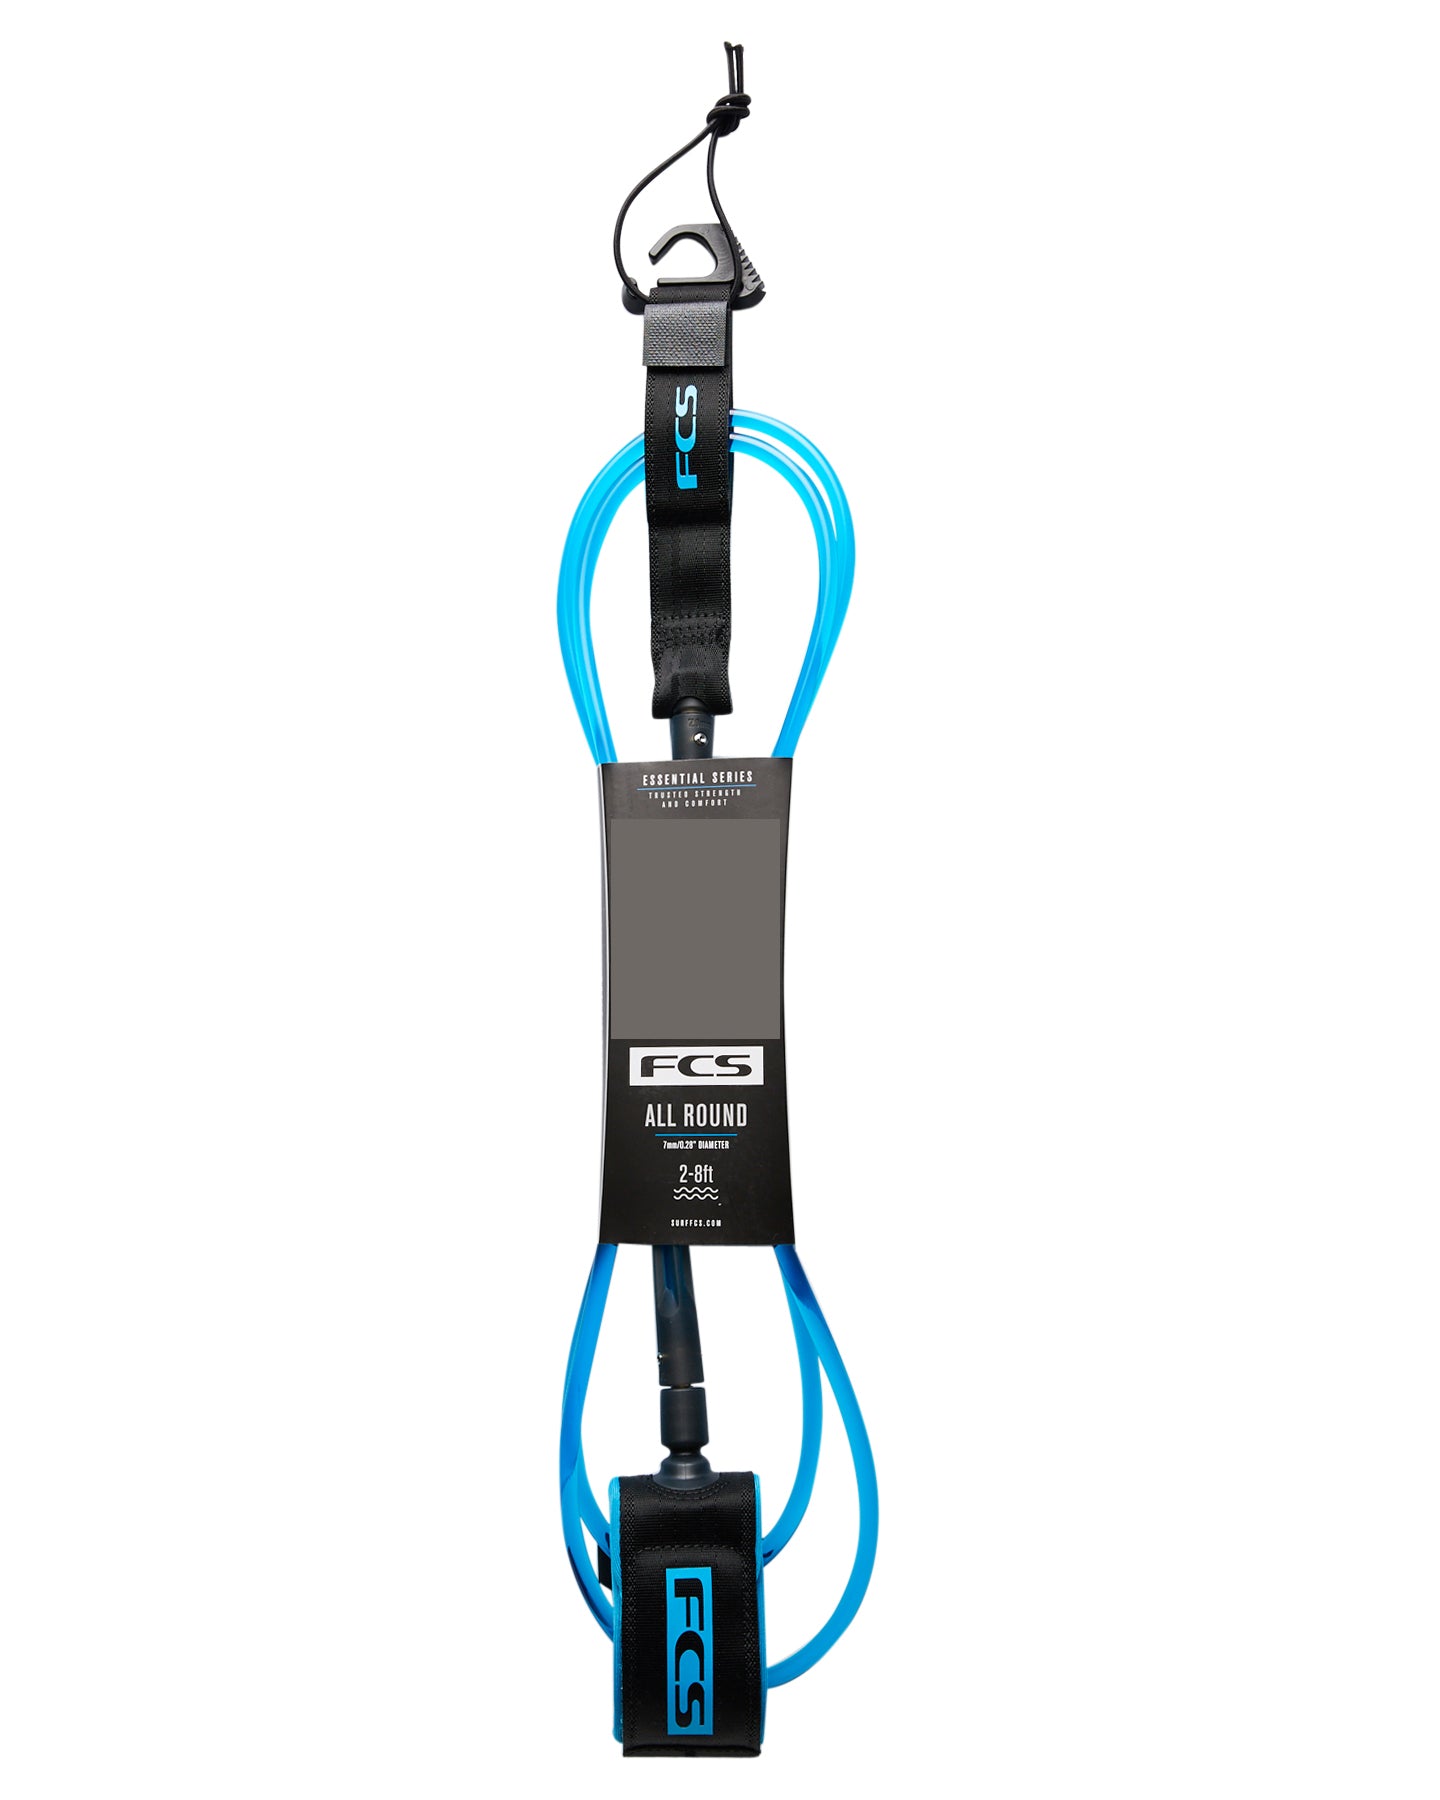 FCS Essential All Round Leash Blue-Black 6ft0in